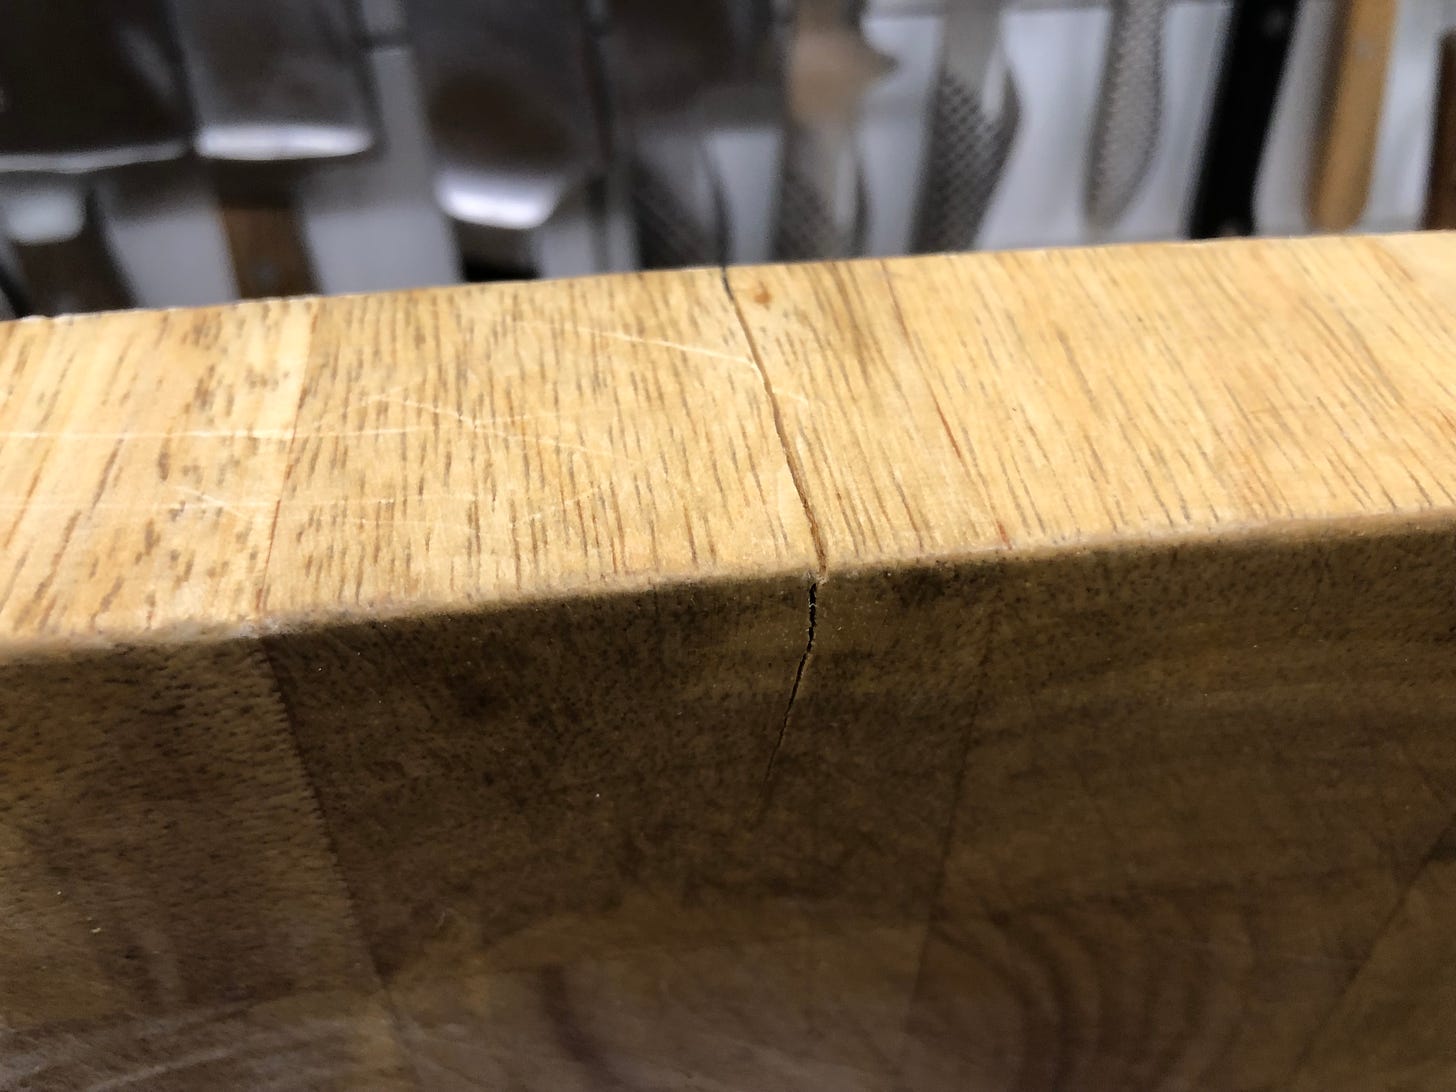 The edge of a thick cutting board with a thin crack in it